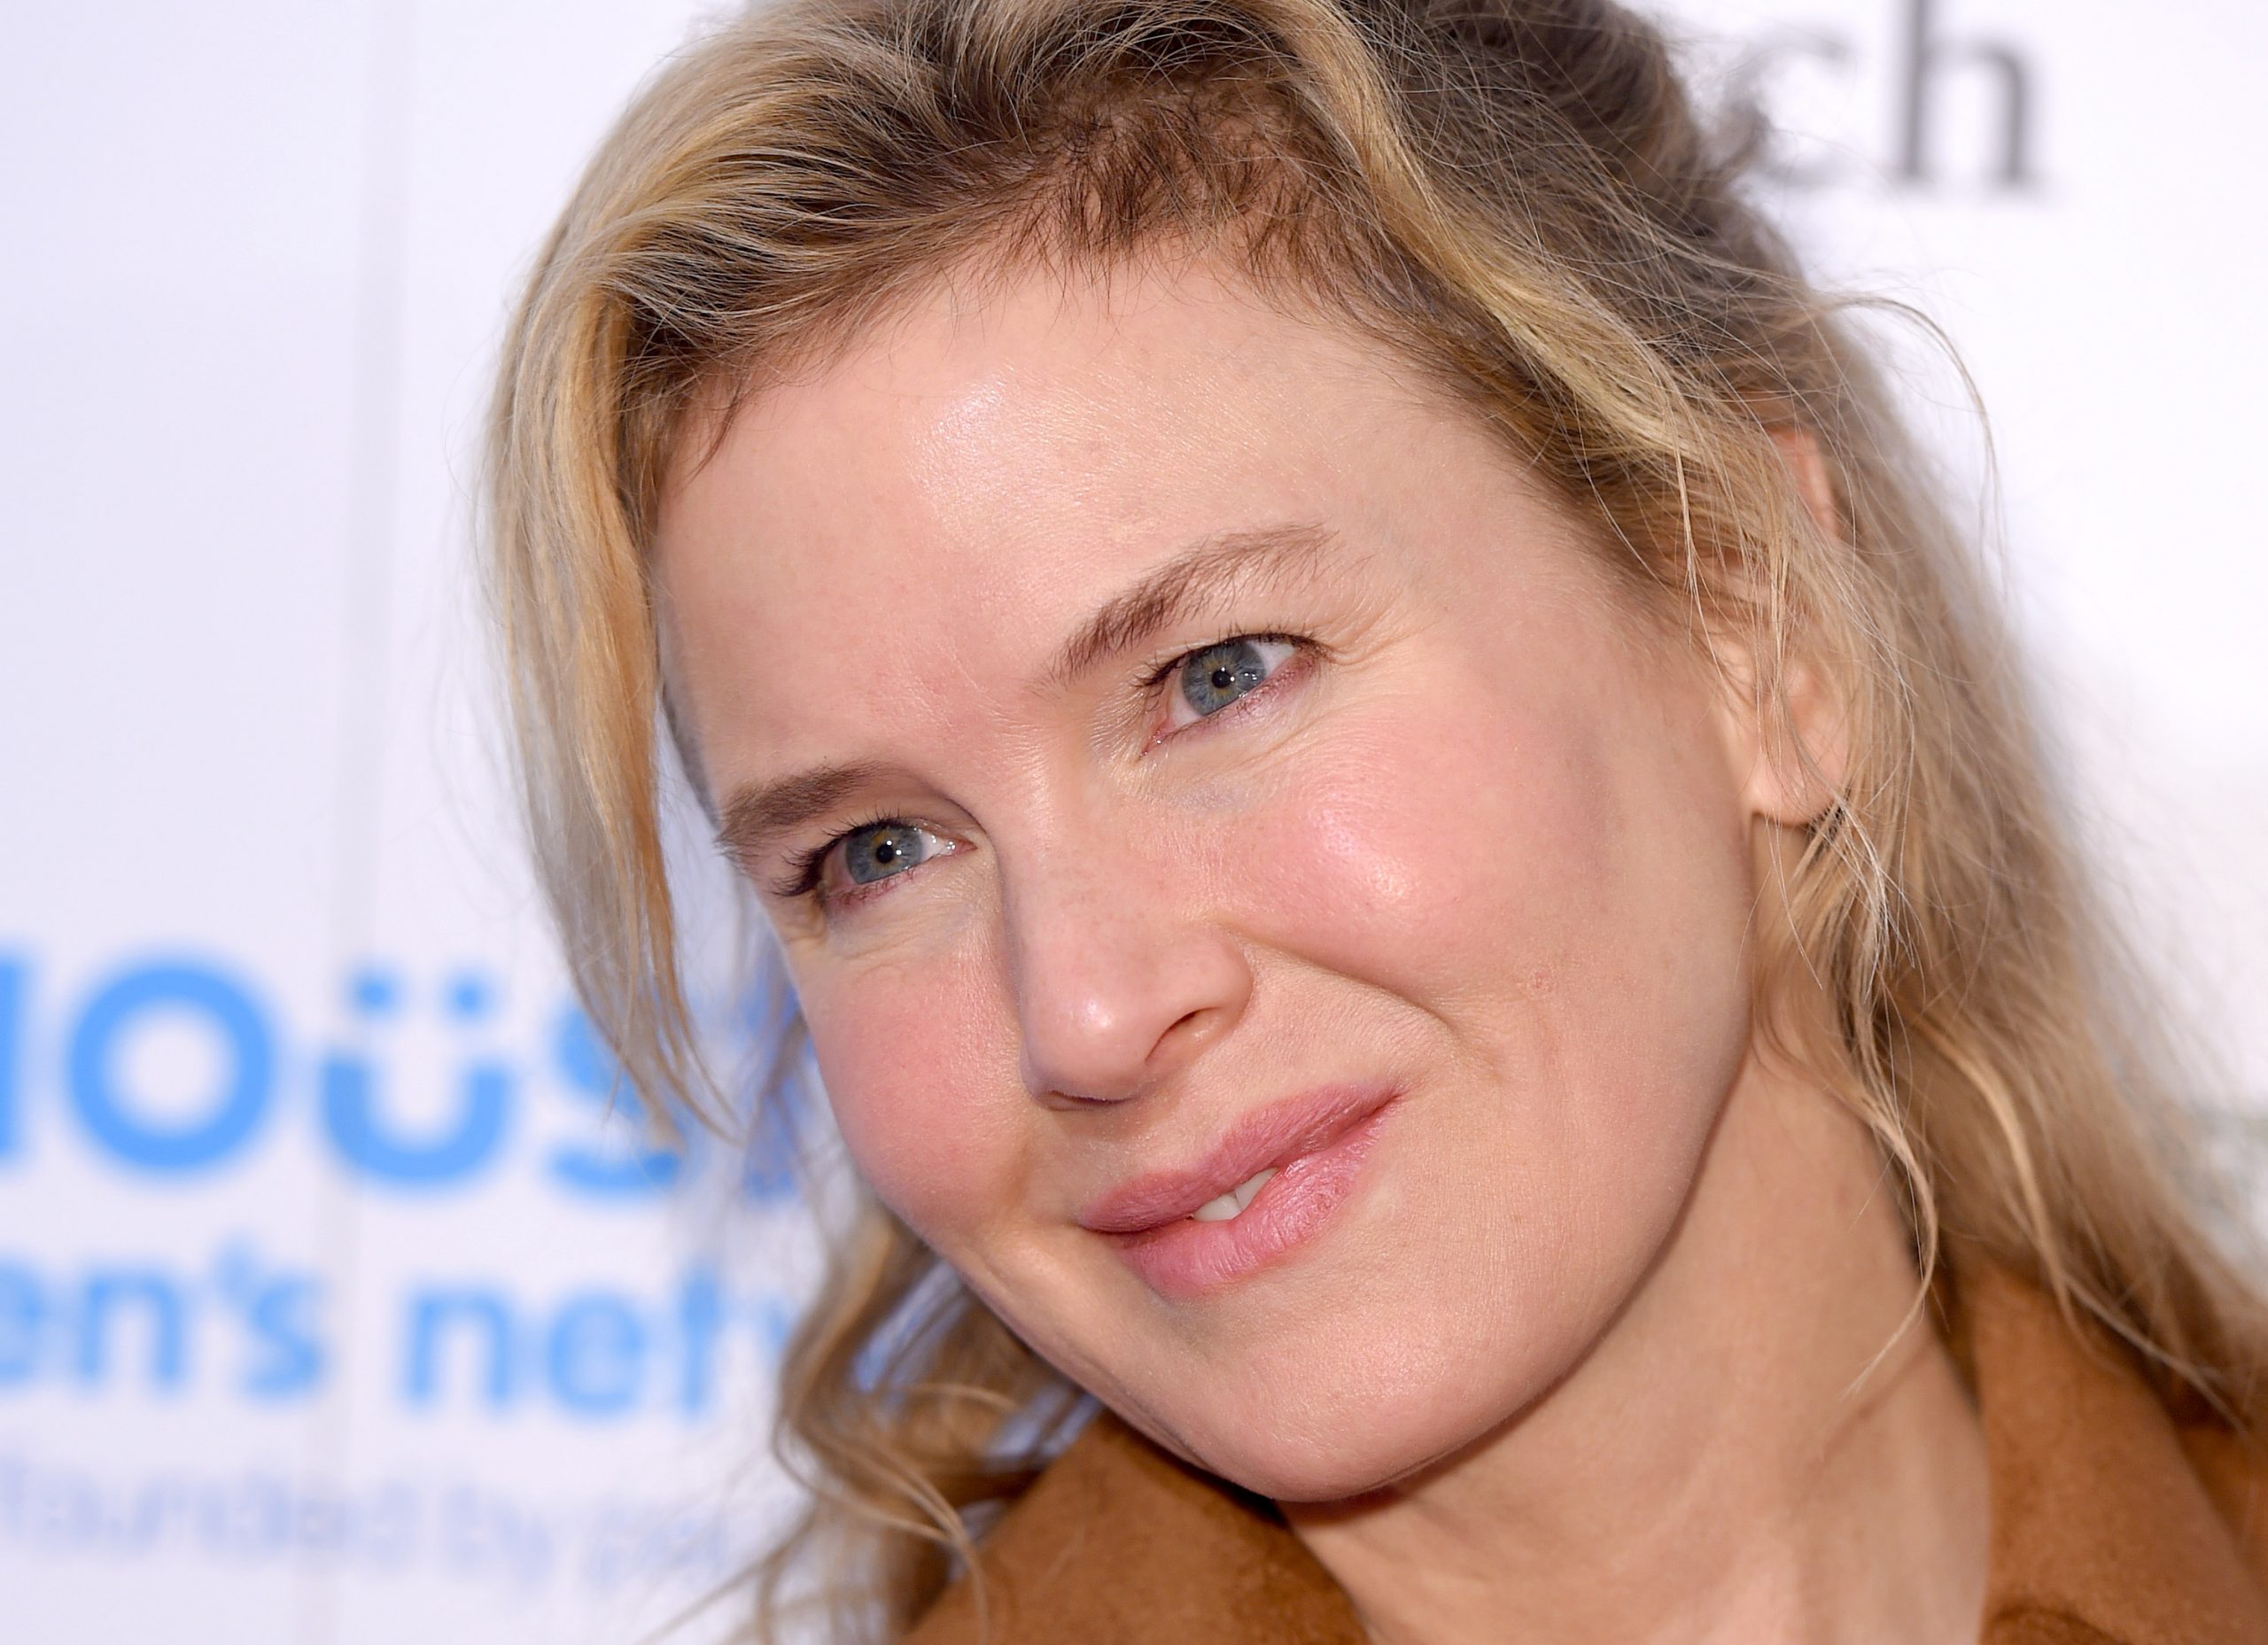 Renee Zellweger's Measurements: Bra Size, Height, Weight and More - Fa...